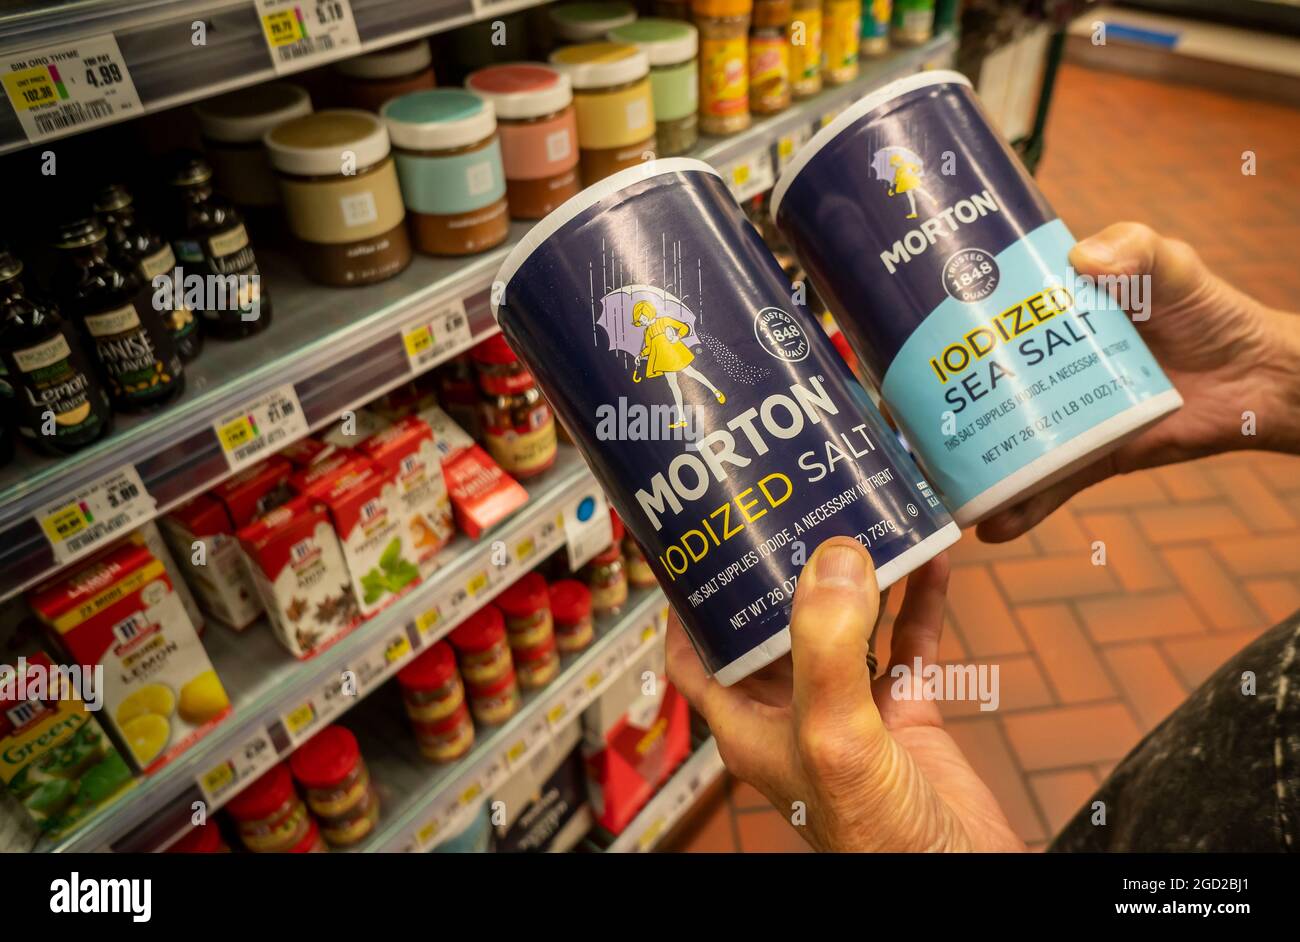 A shopper chooses containers of Morton brand iodized salt and sea salt in a supermarket in New York on Monday, August 2, 2021. Morton Salt announced that it was terminating 120 employees in its Chicago headquarters. (© Richard B. Levine) Stock Photo